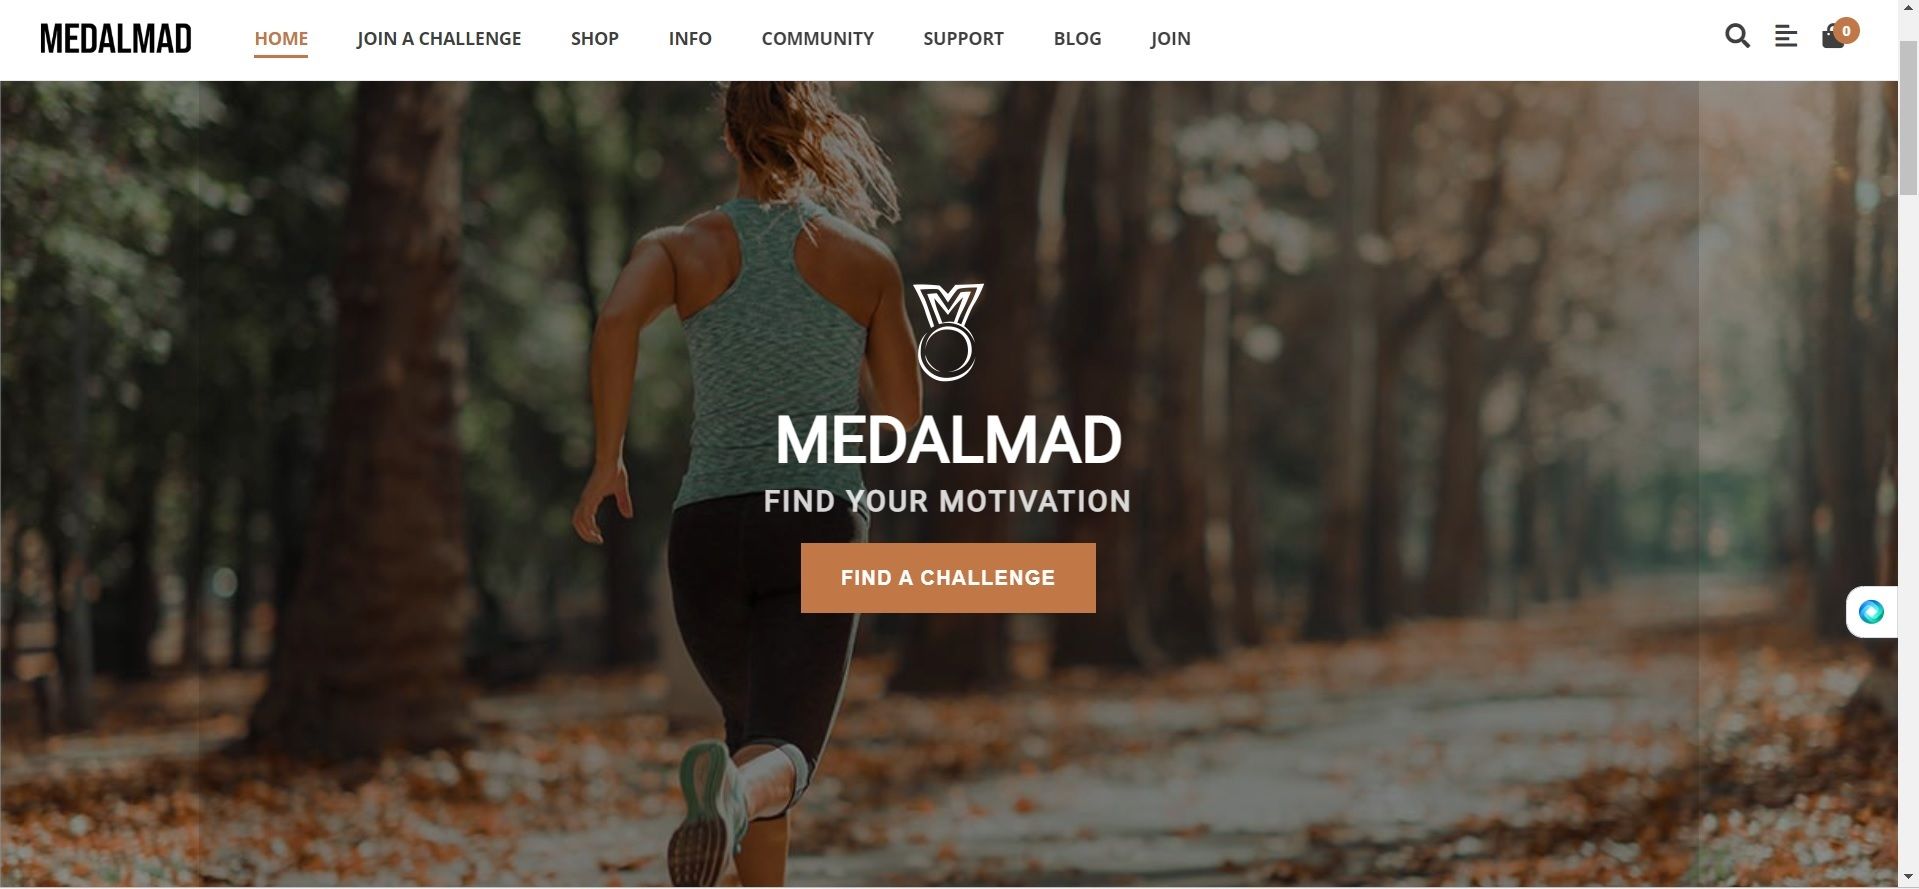 MedalMad website home page